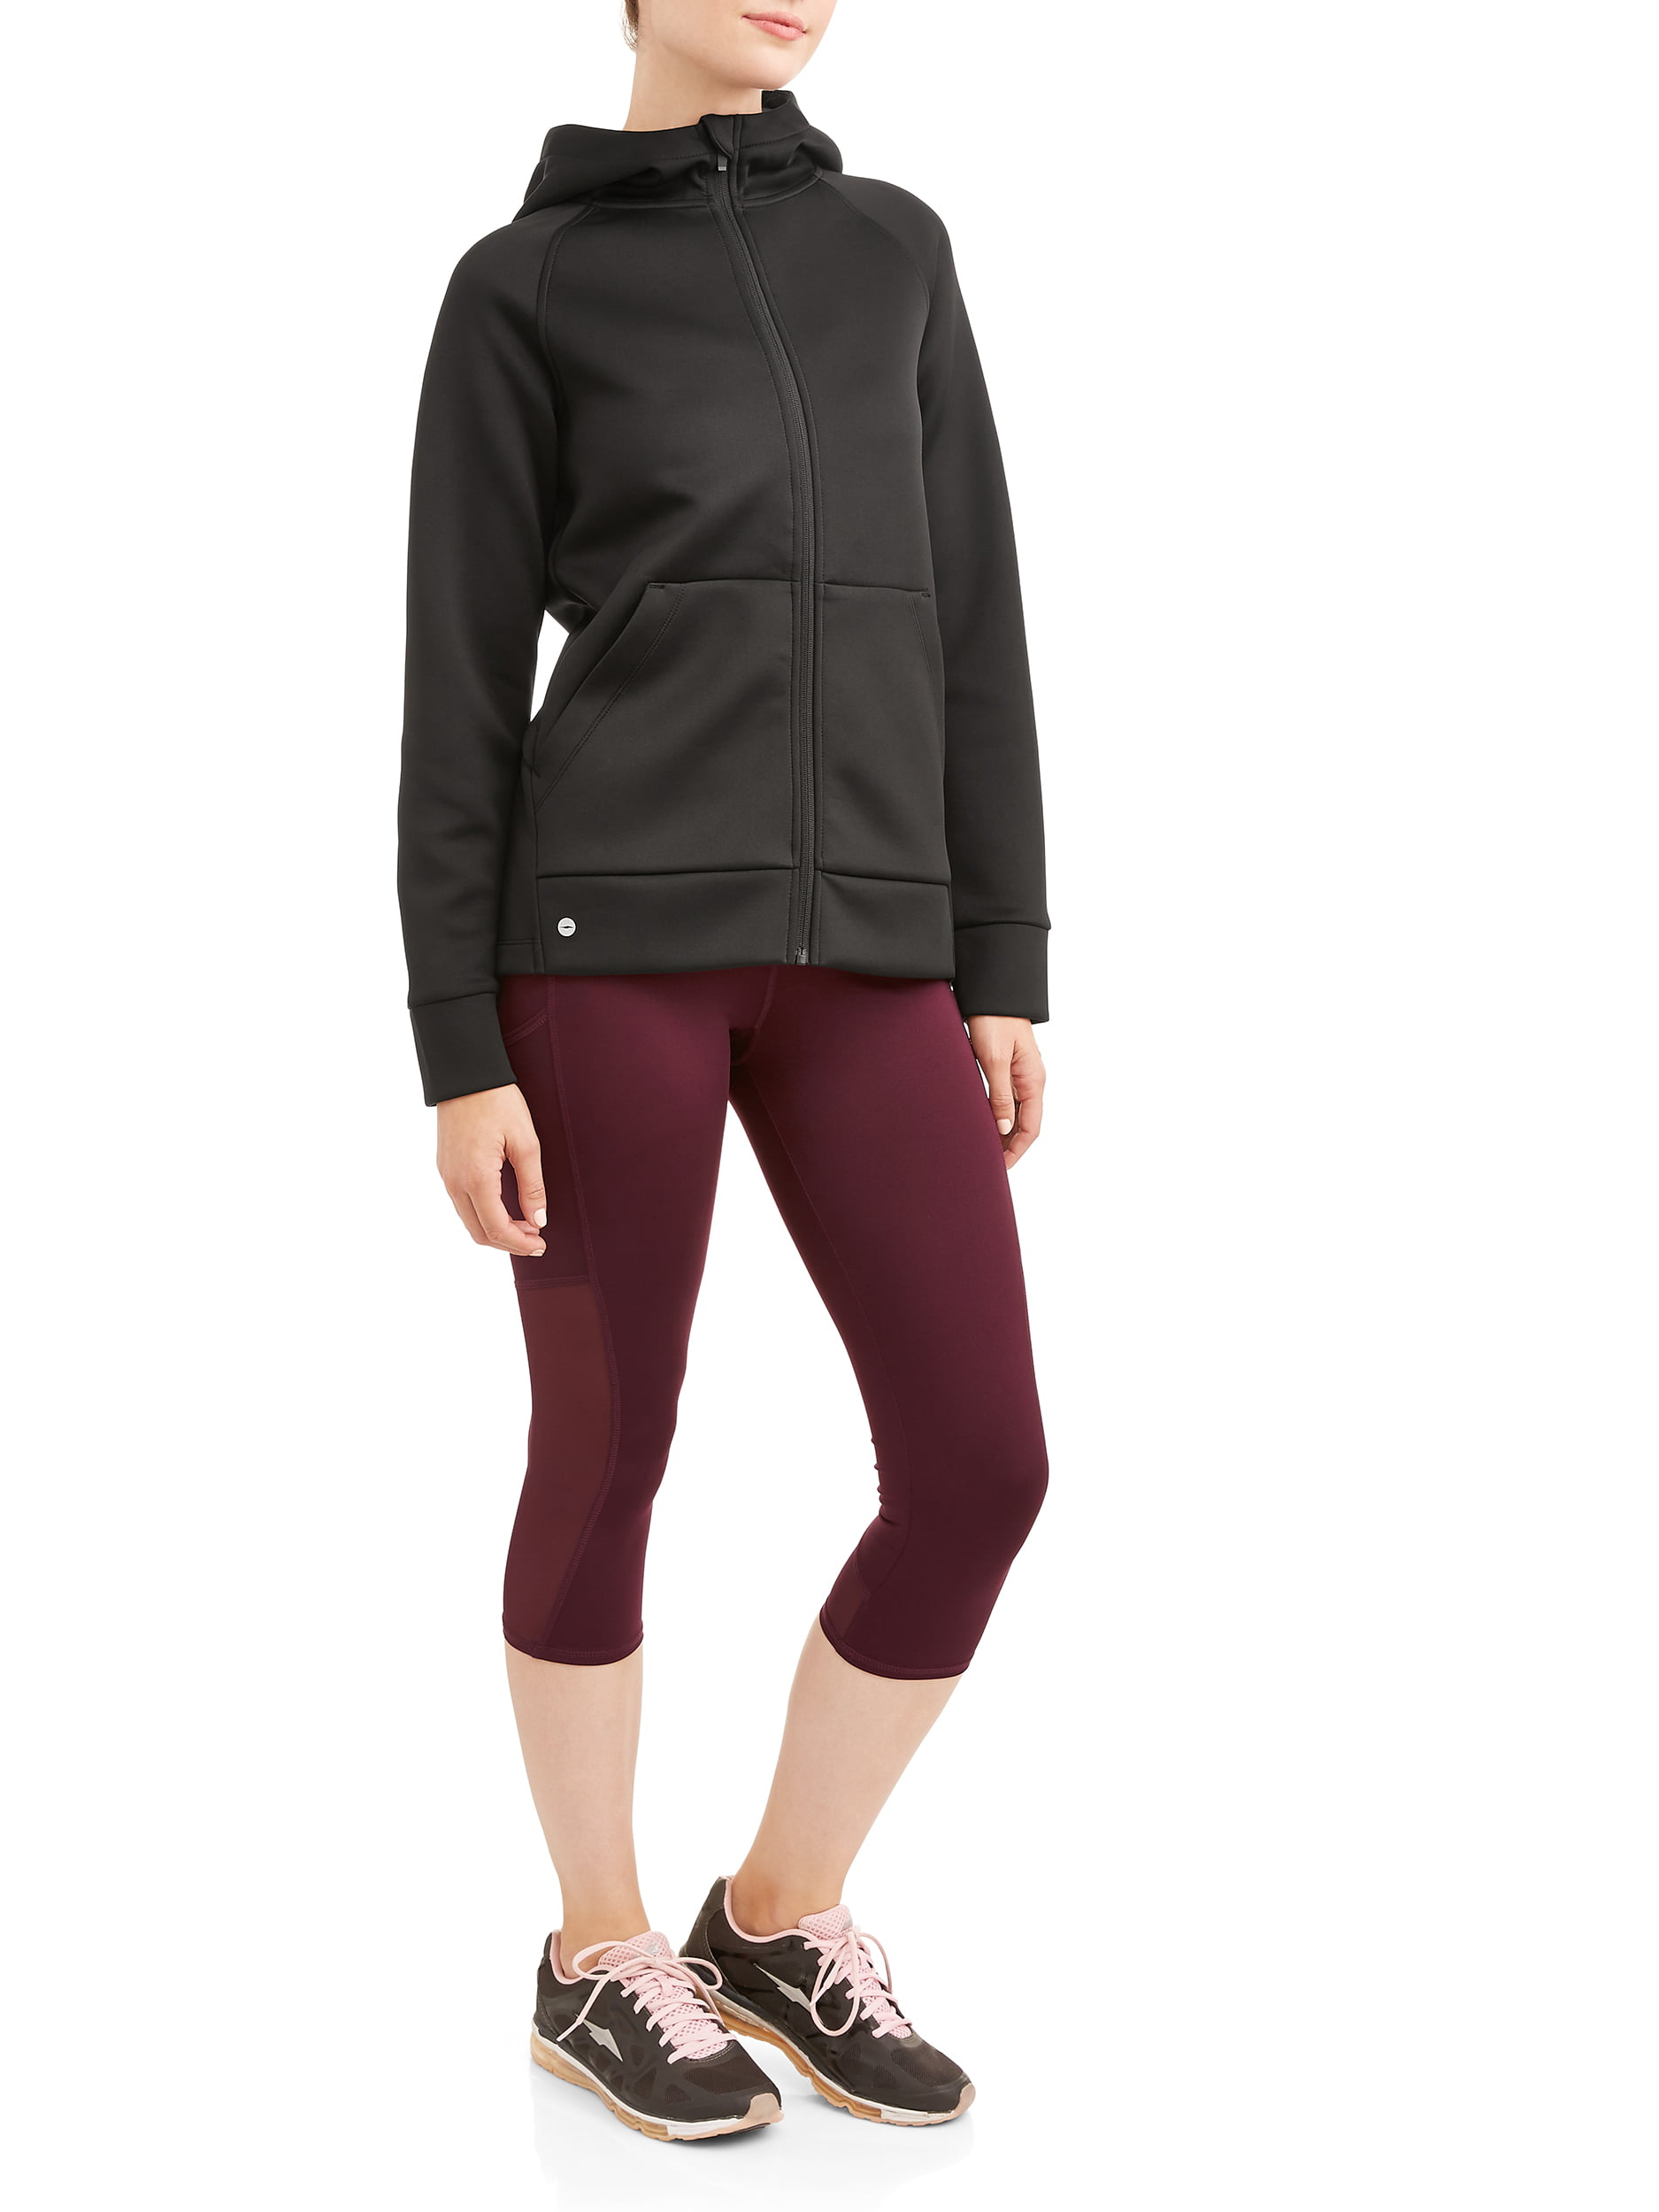 Details about   Women's Active Flex Tech To and From Scuba Jacket 